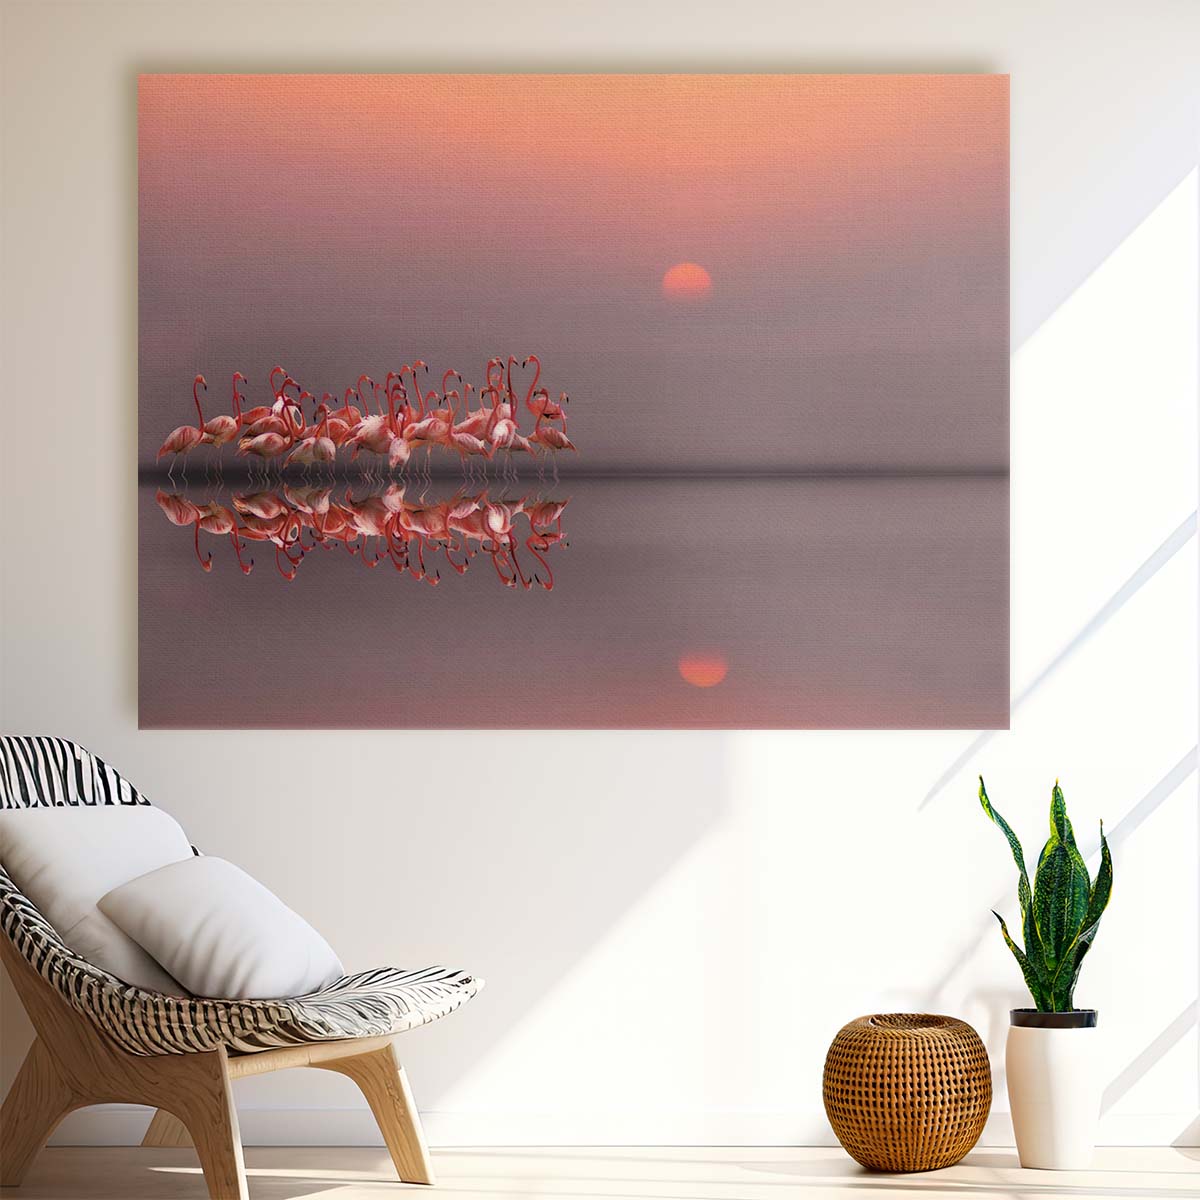 Sunset Flamingo Flock Reflection Wall Art by Anna Cseresnjes by Luxuriance Designs. Made in USA.